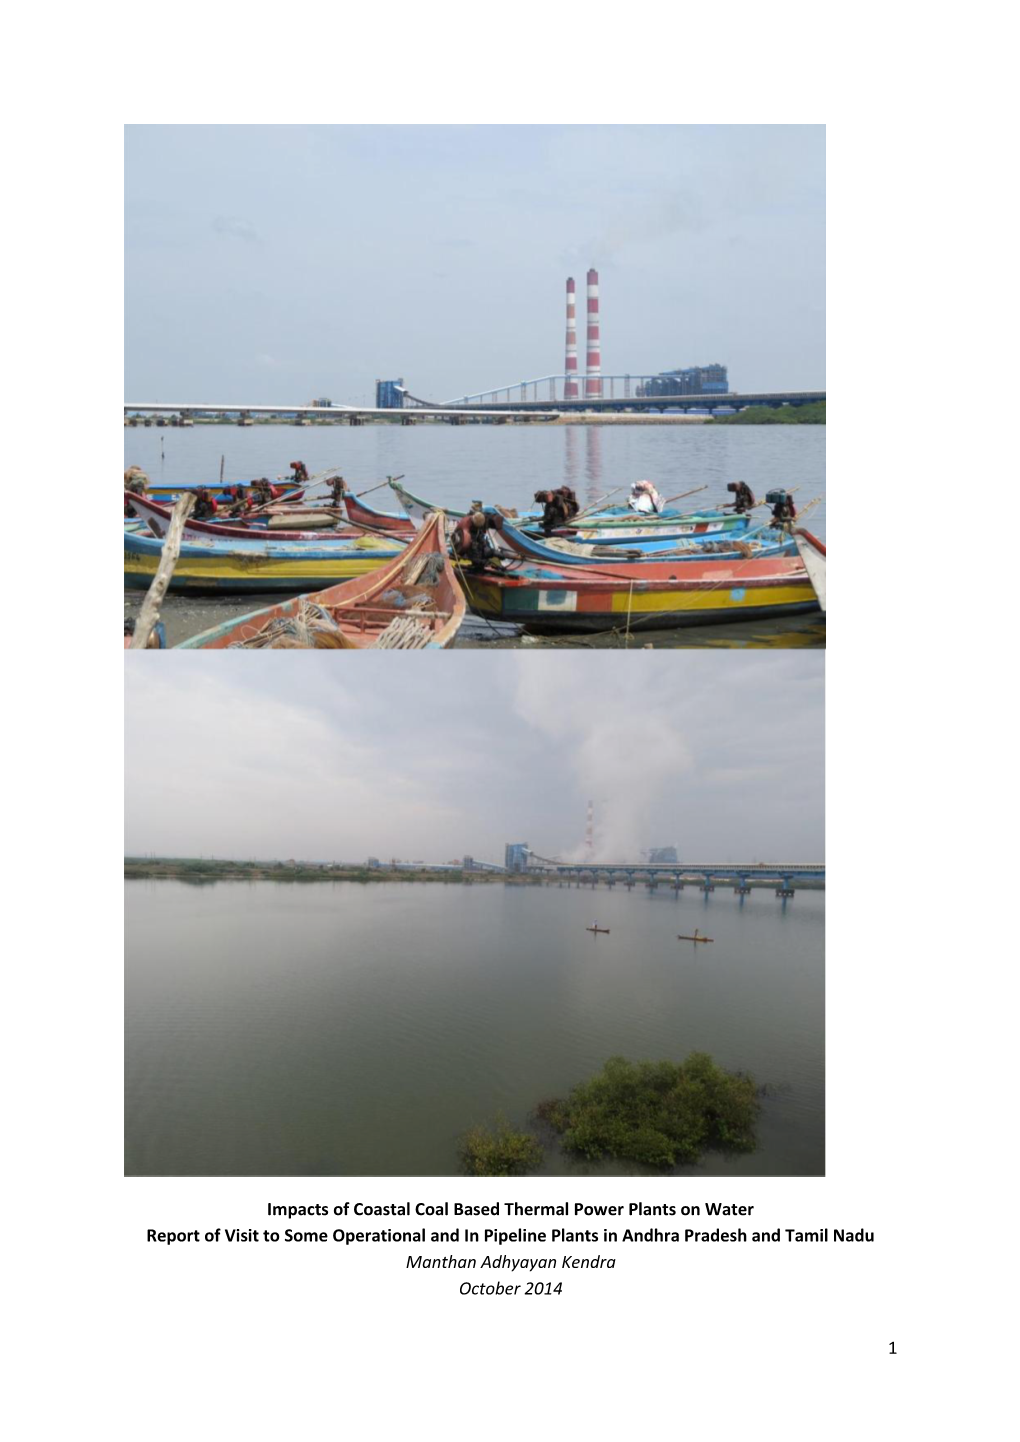 Impacts of Coastal Coal Based Thermal Power Plants on Water